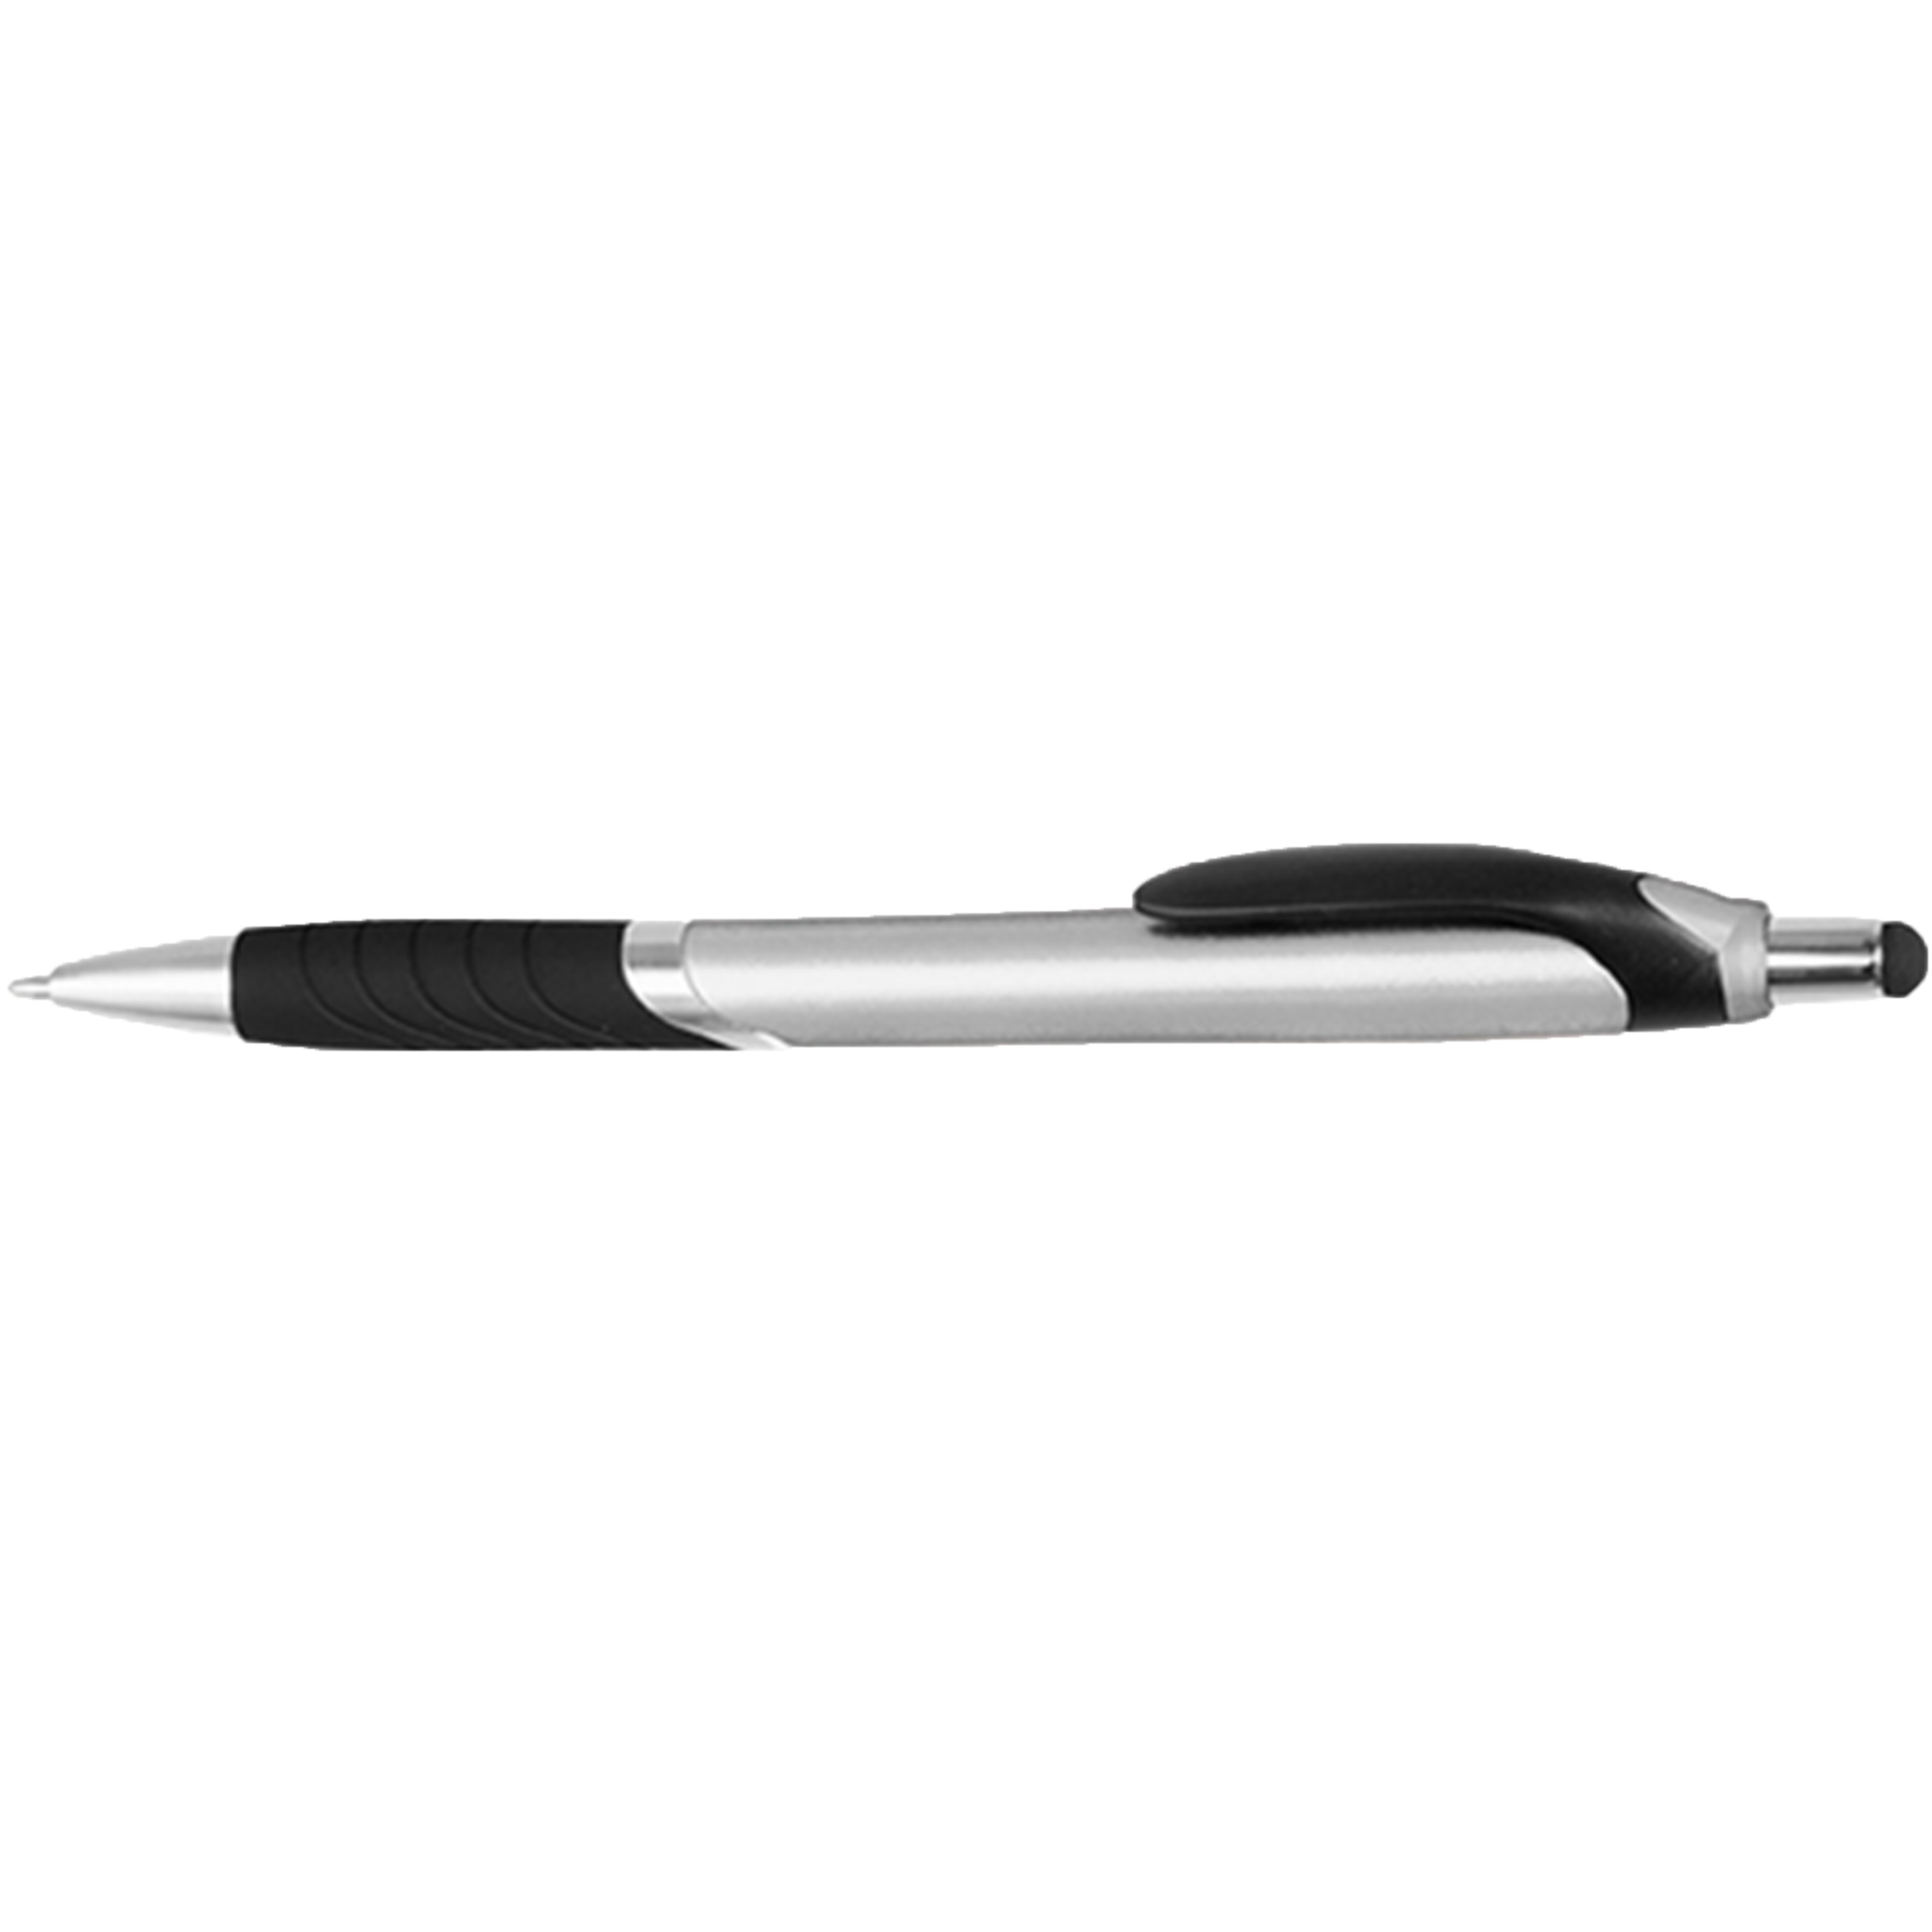 Plastic Pens with Screen Stylus - 50 Pack - Silver Casing Color